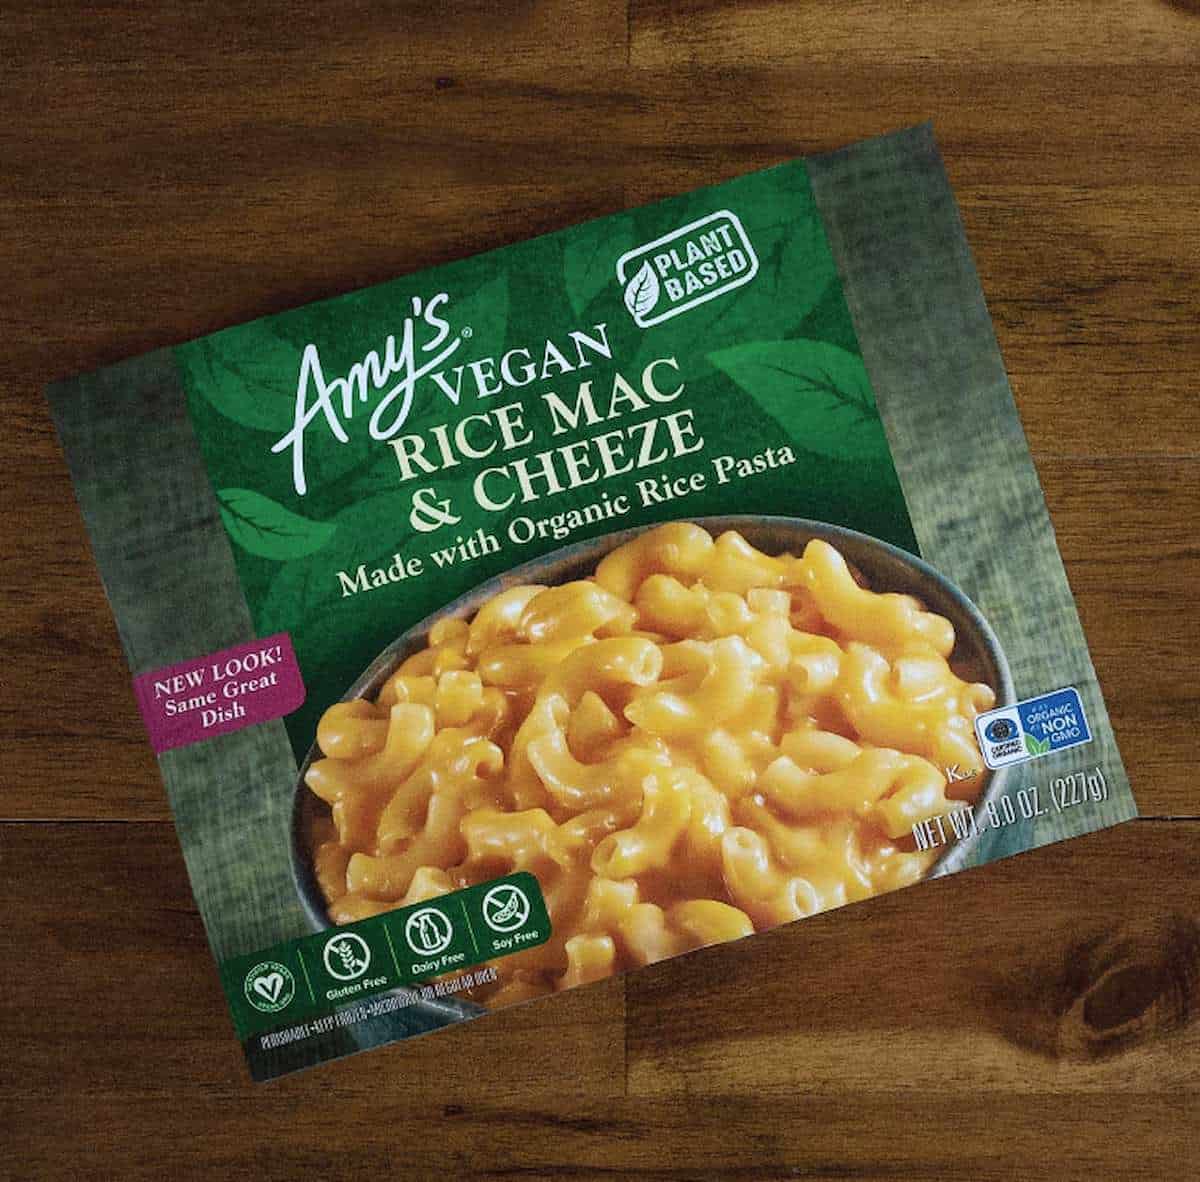 A box of Amy's Kitchen Vegan Rice Mac And Cheeze.